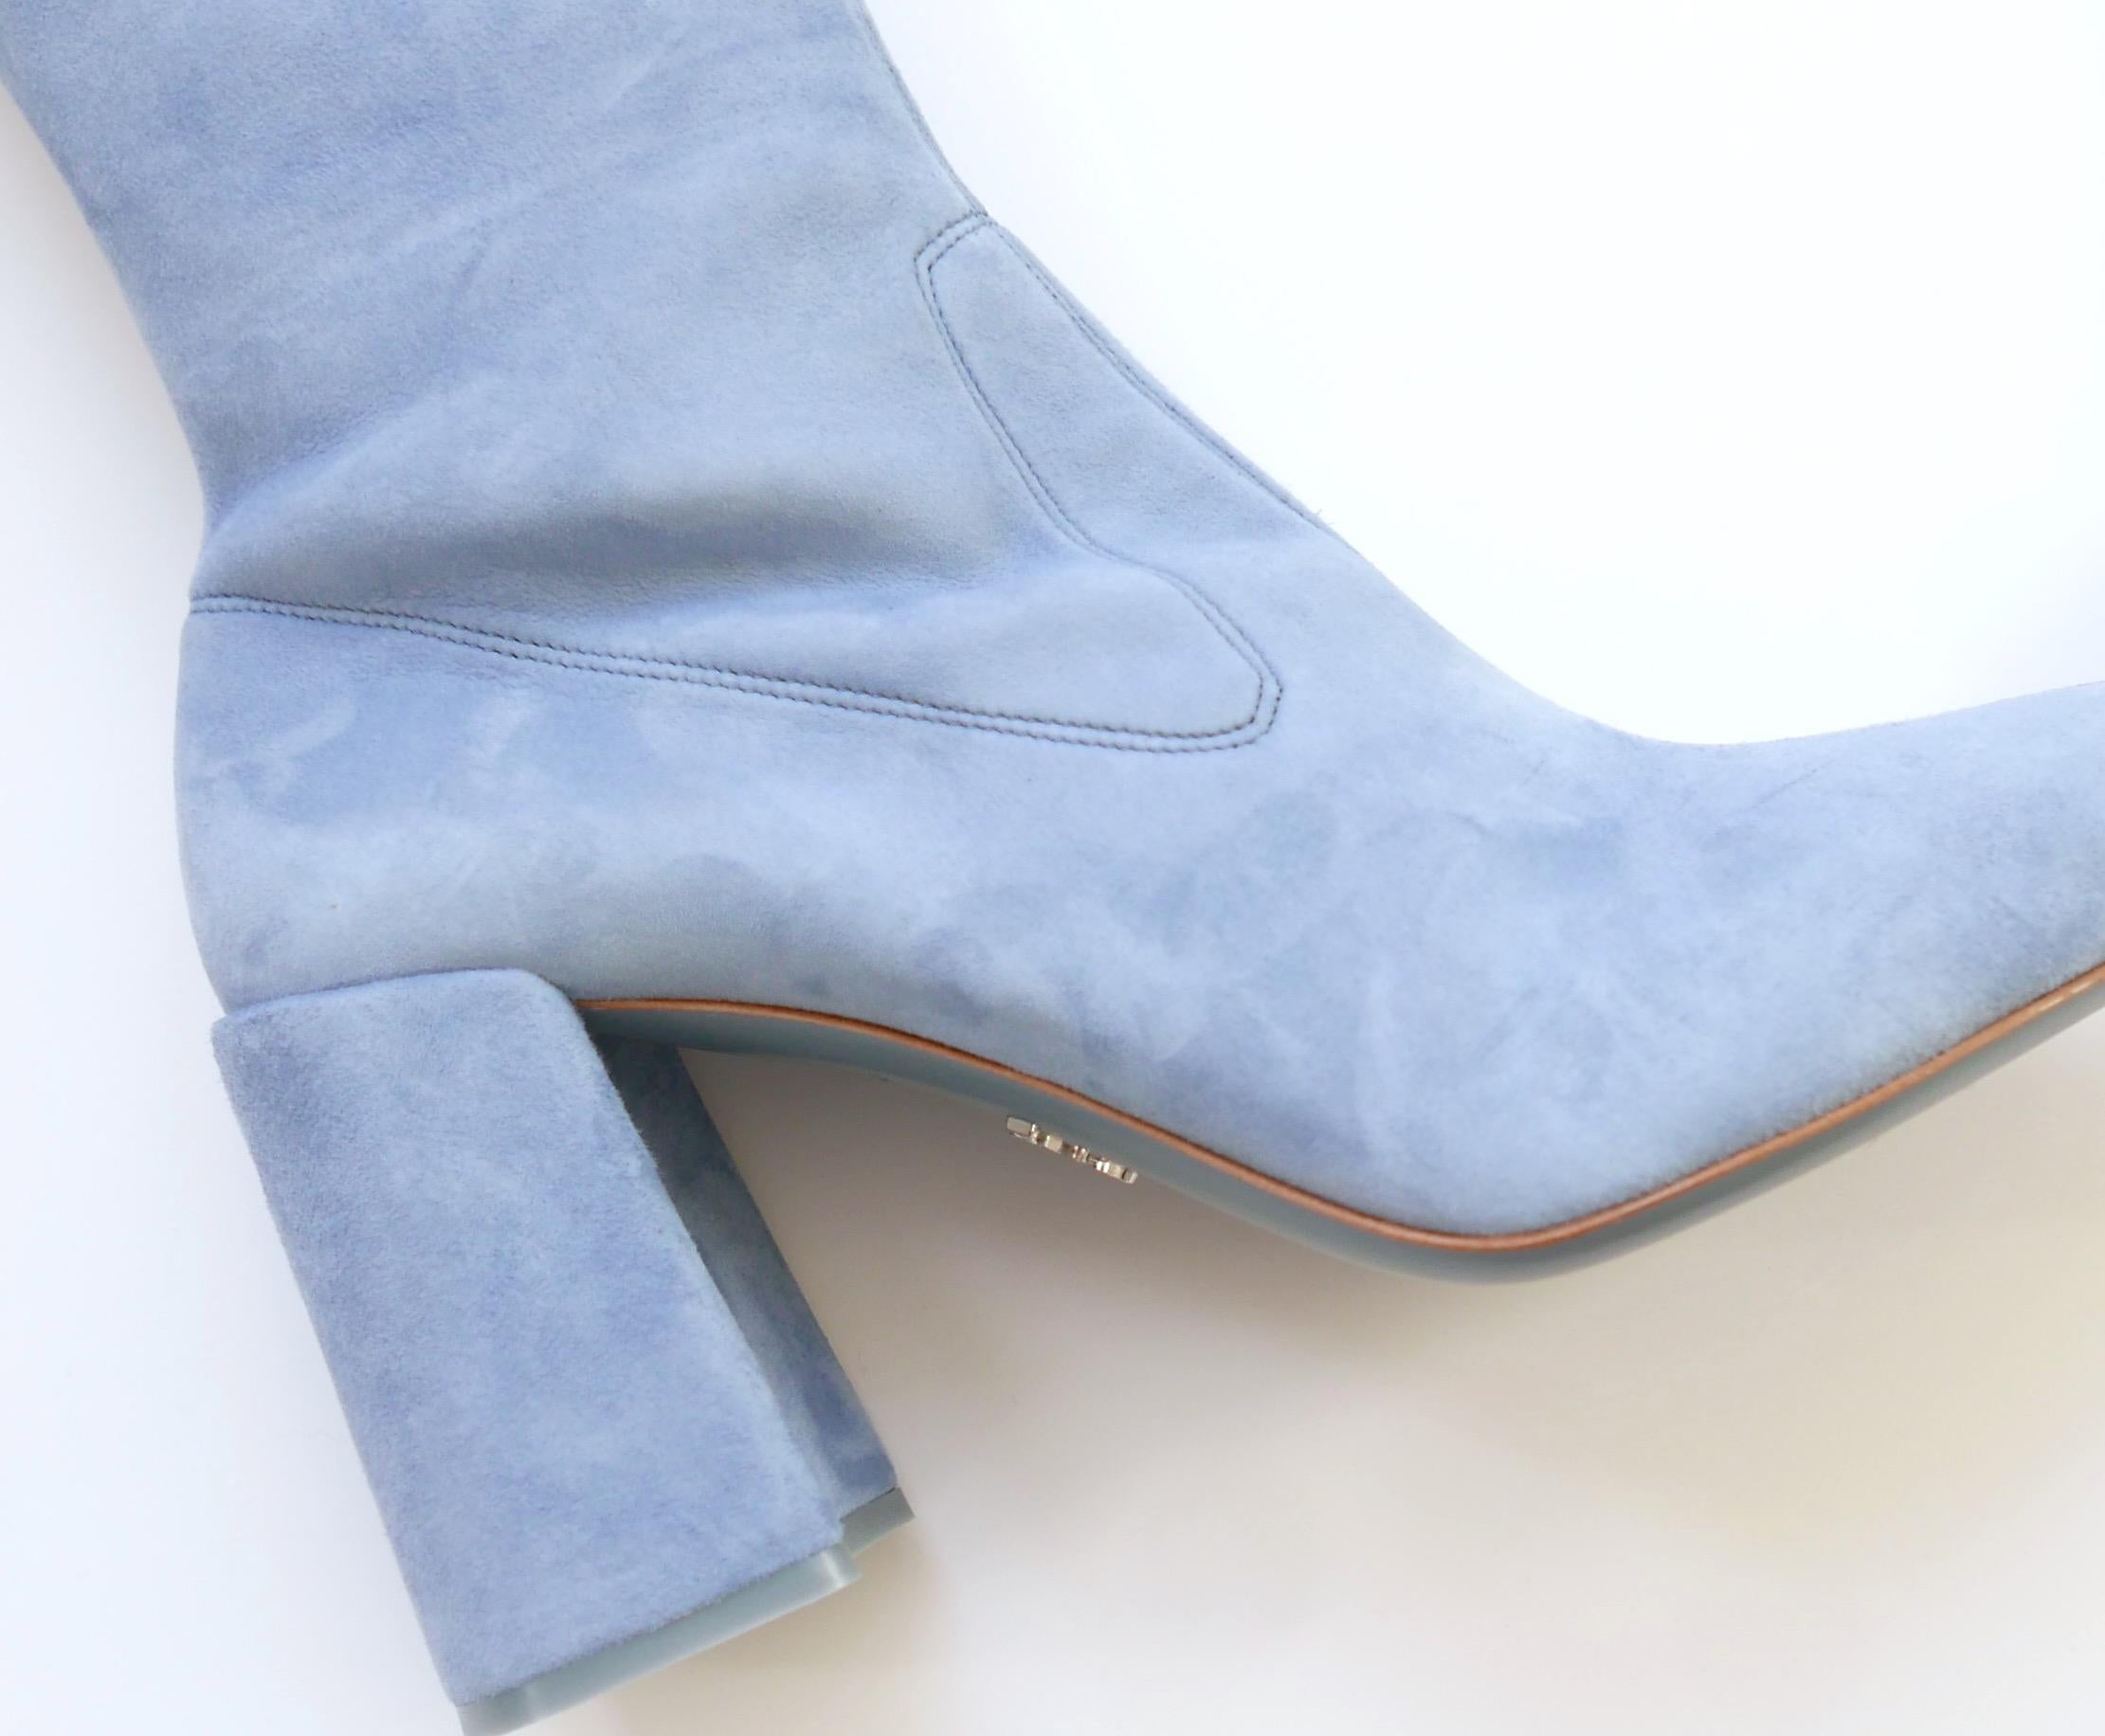 Prada Fall 2015 Powder Blue Suede Over The  Knee Boots For Sale 4